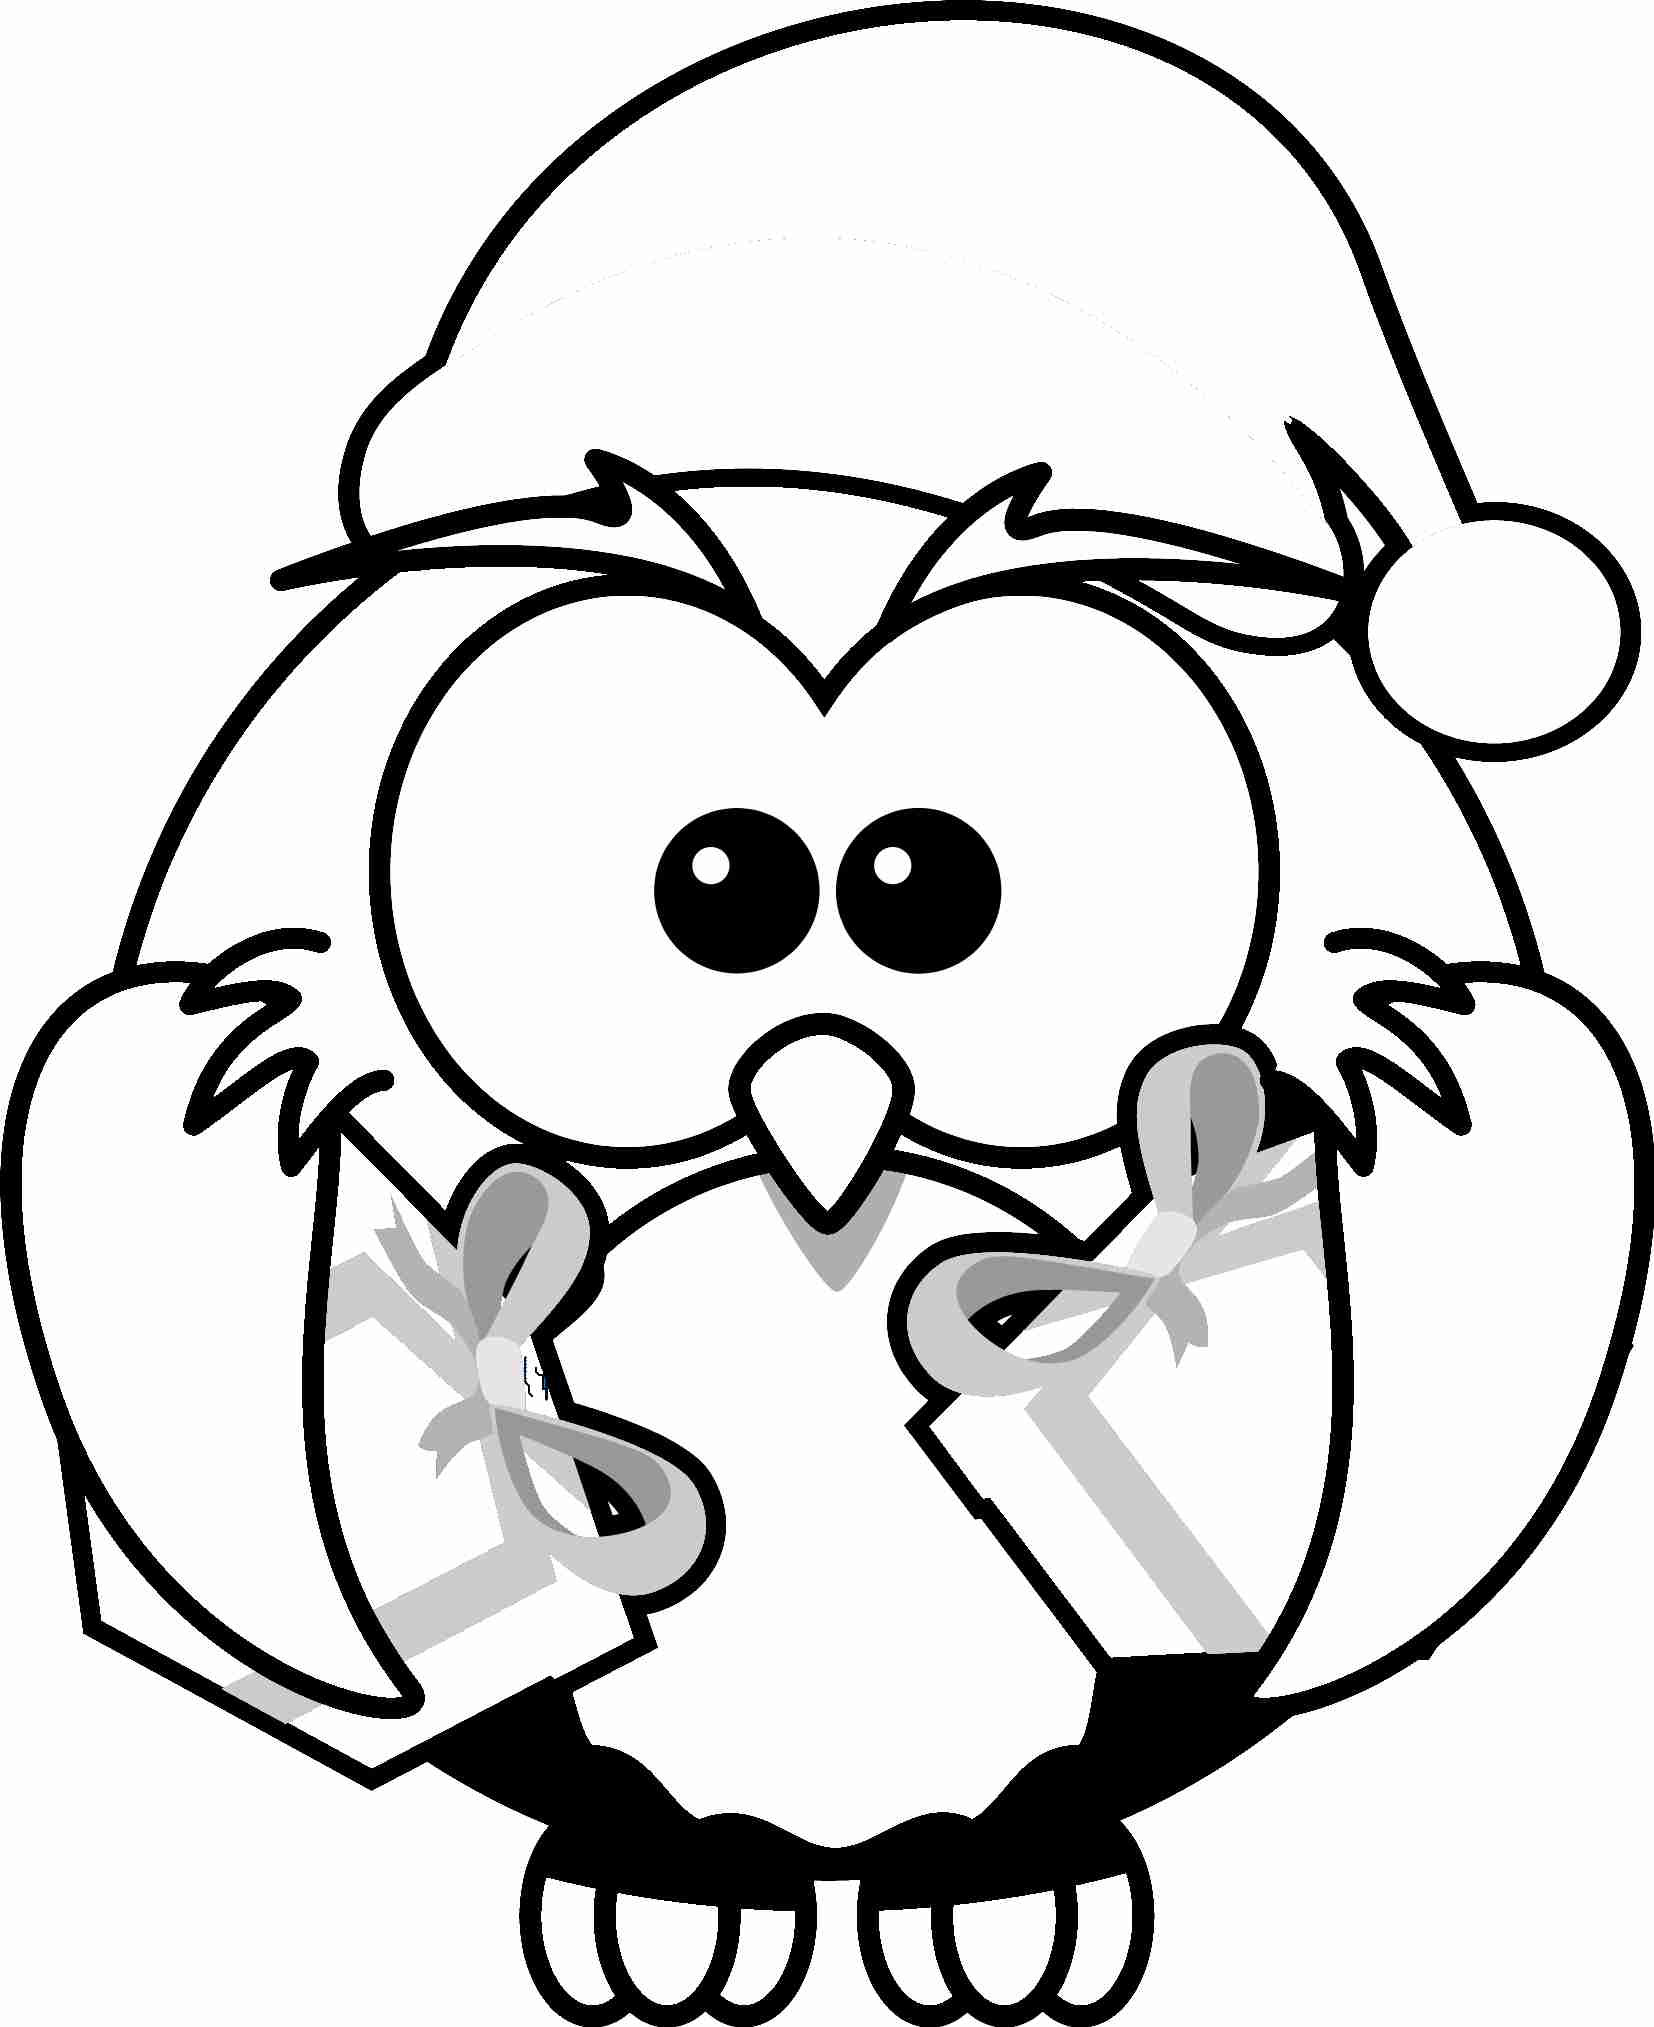 Christmas Coloring Sheets For Kids
 Christmas Coloring Pages